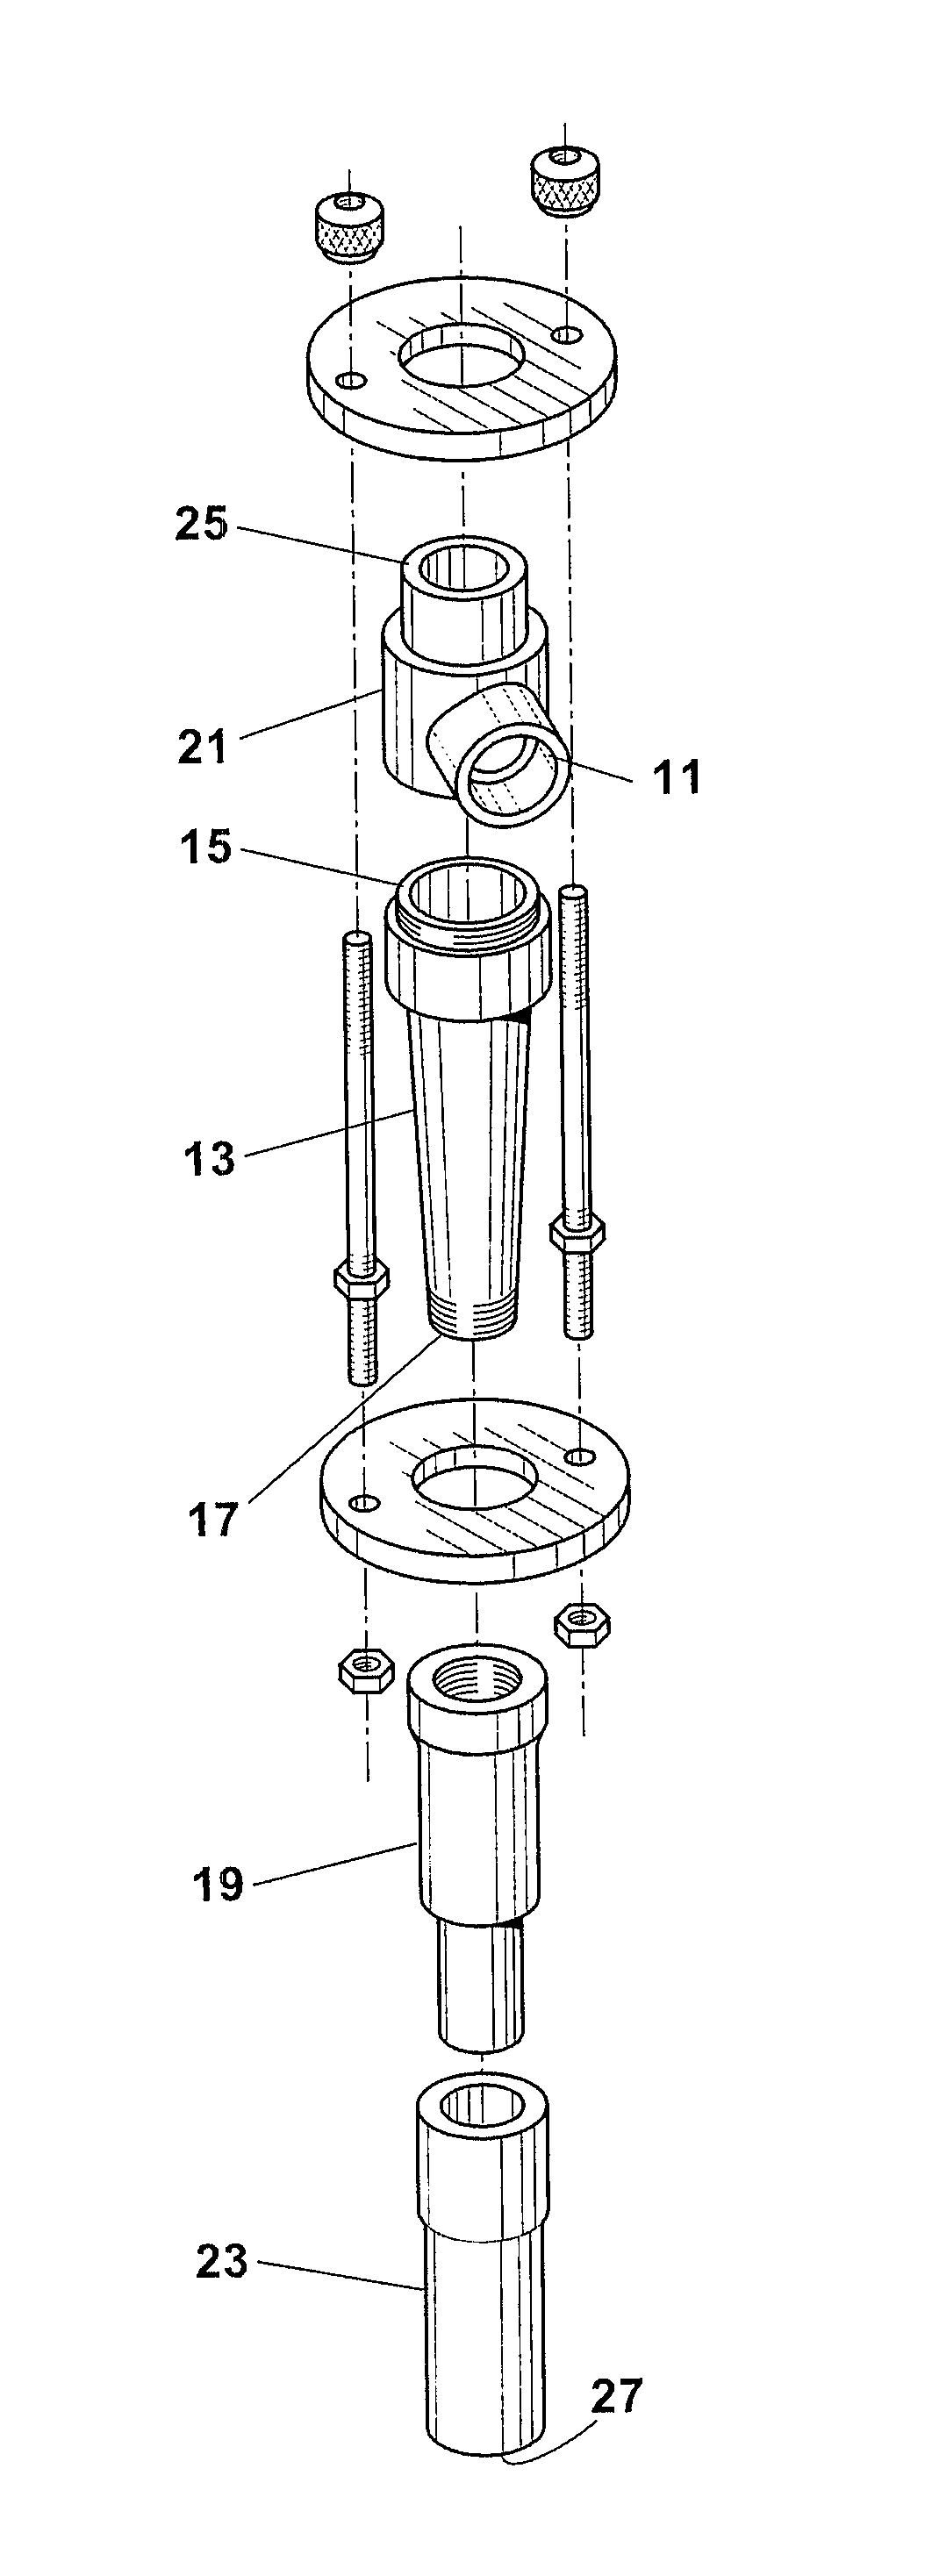 Method for Separating Entrained Catalyst and Catalyst Fines from Slurry Oil